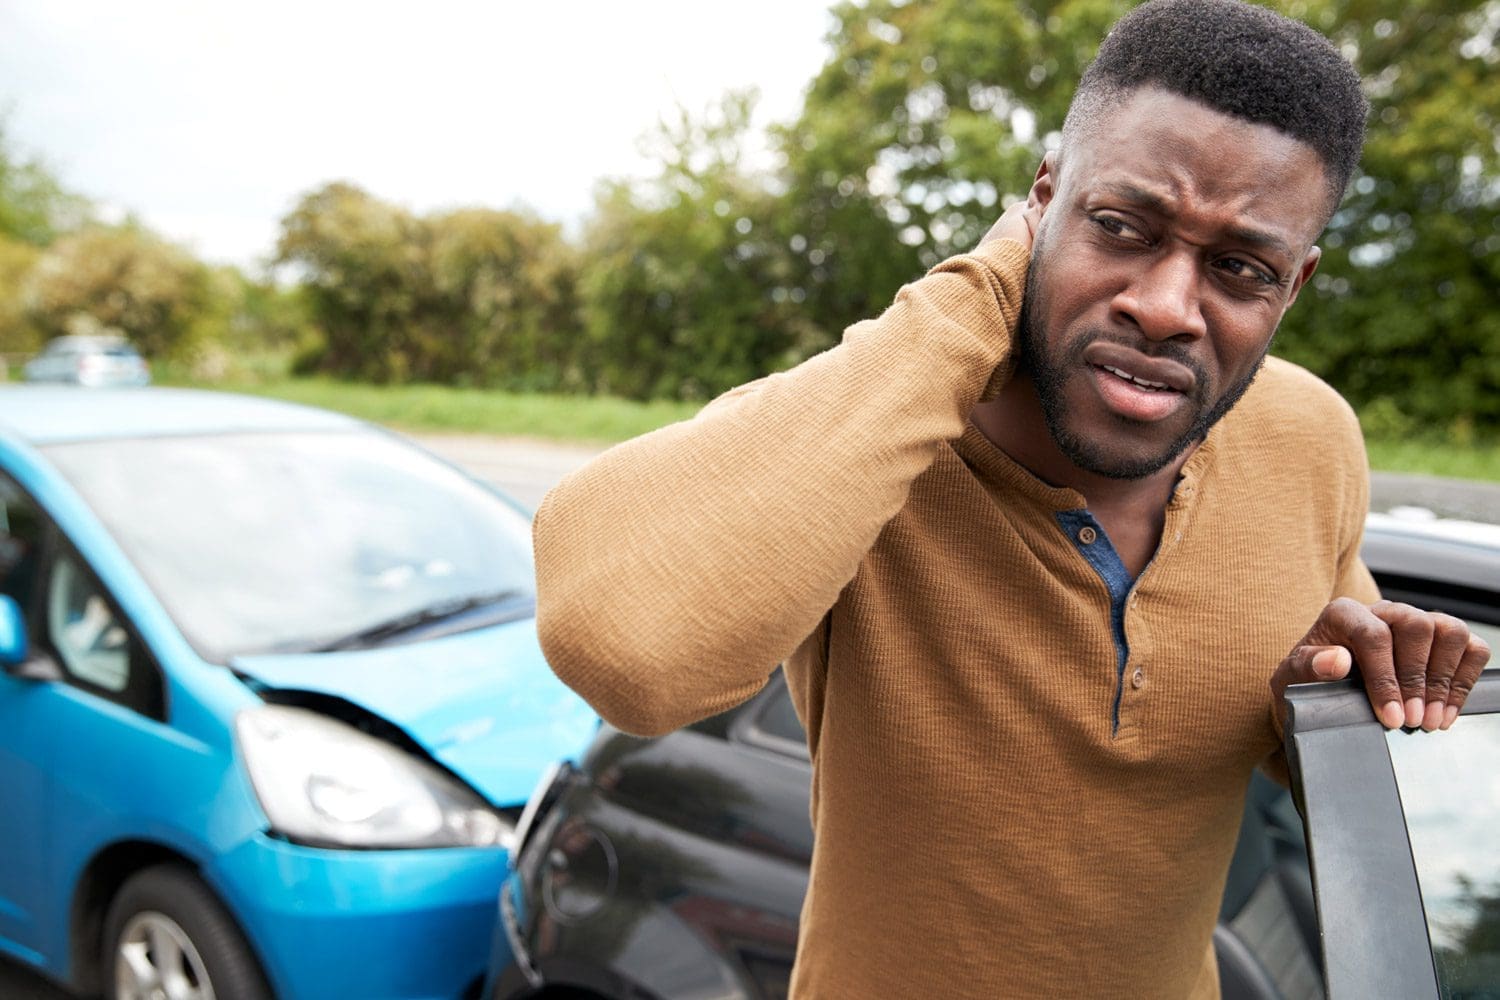 A man gets out of his wrecked car wincing in pain because of car accident injuries to his neck.